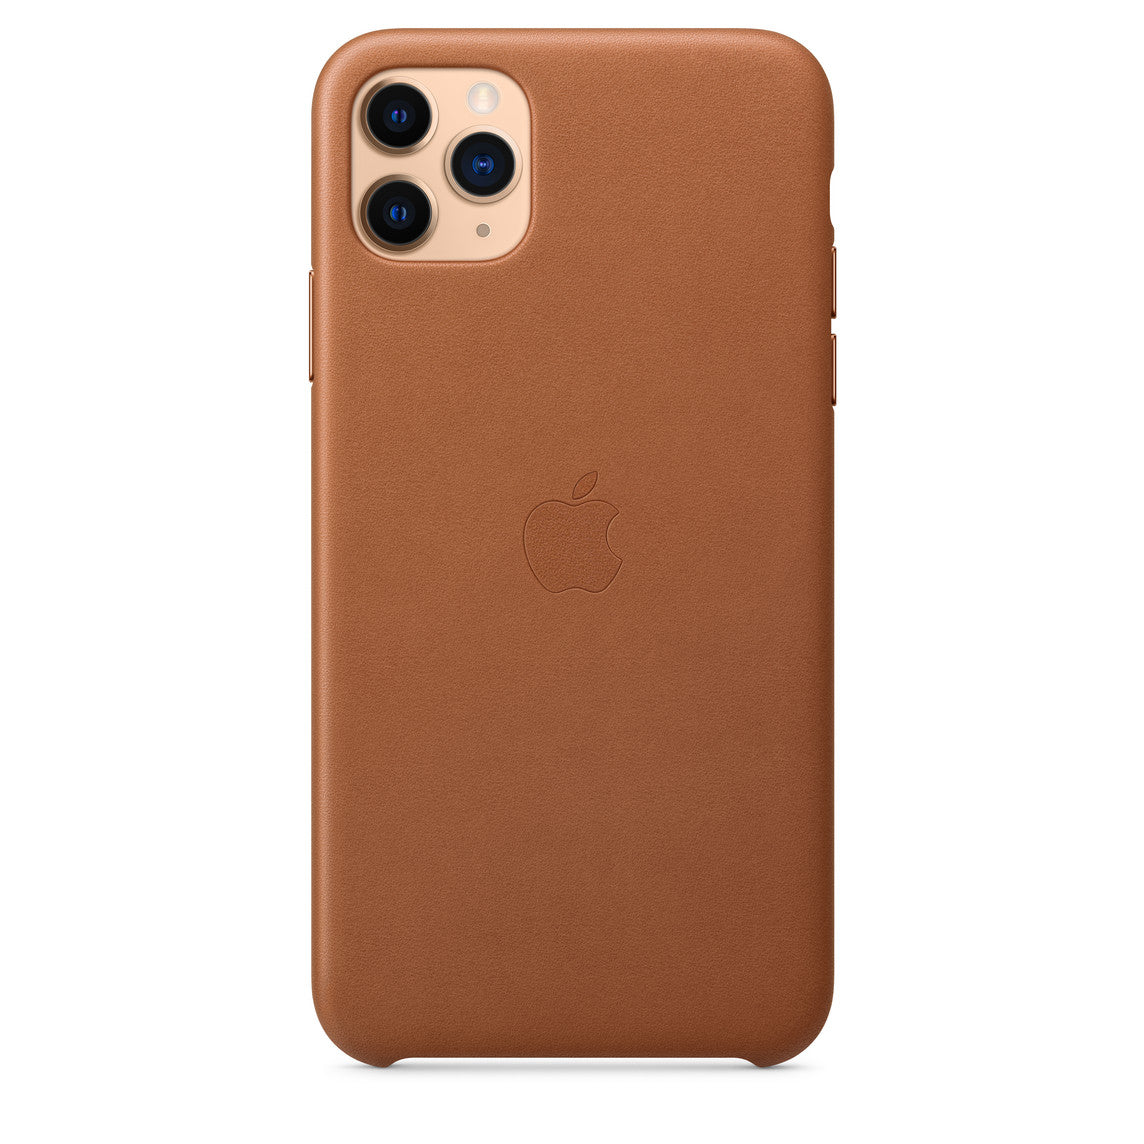 Apple iPhone 11 Pro Max Leather Case - Saddle Brown Saddle Brown New - Sealed